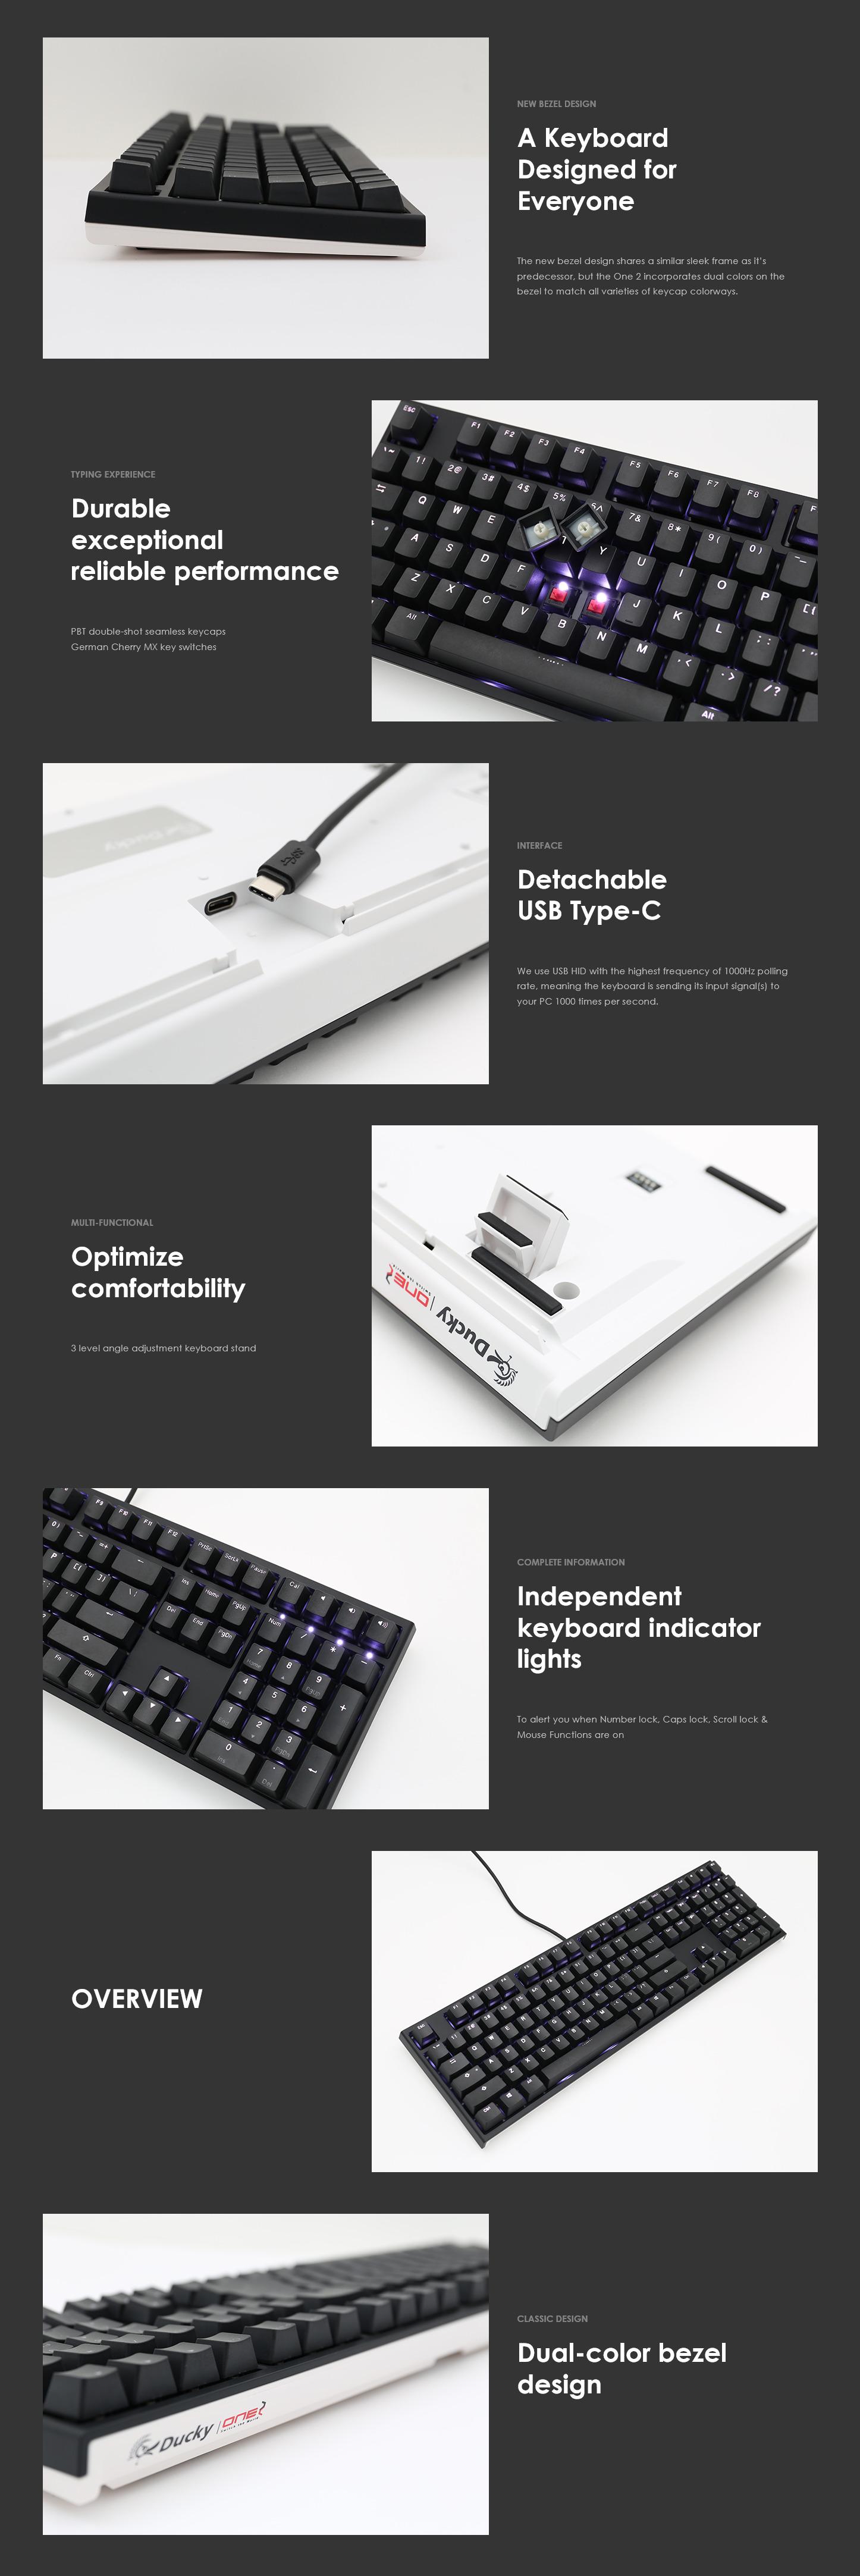 Ducky One 2 TKL Backlit Black Mechanical Keyboard with Cherry MX Red Key Switches